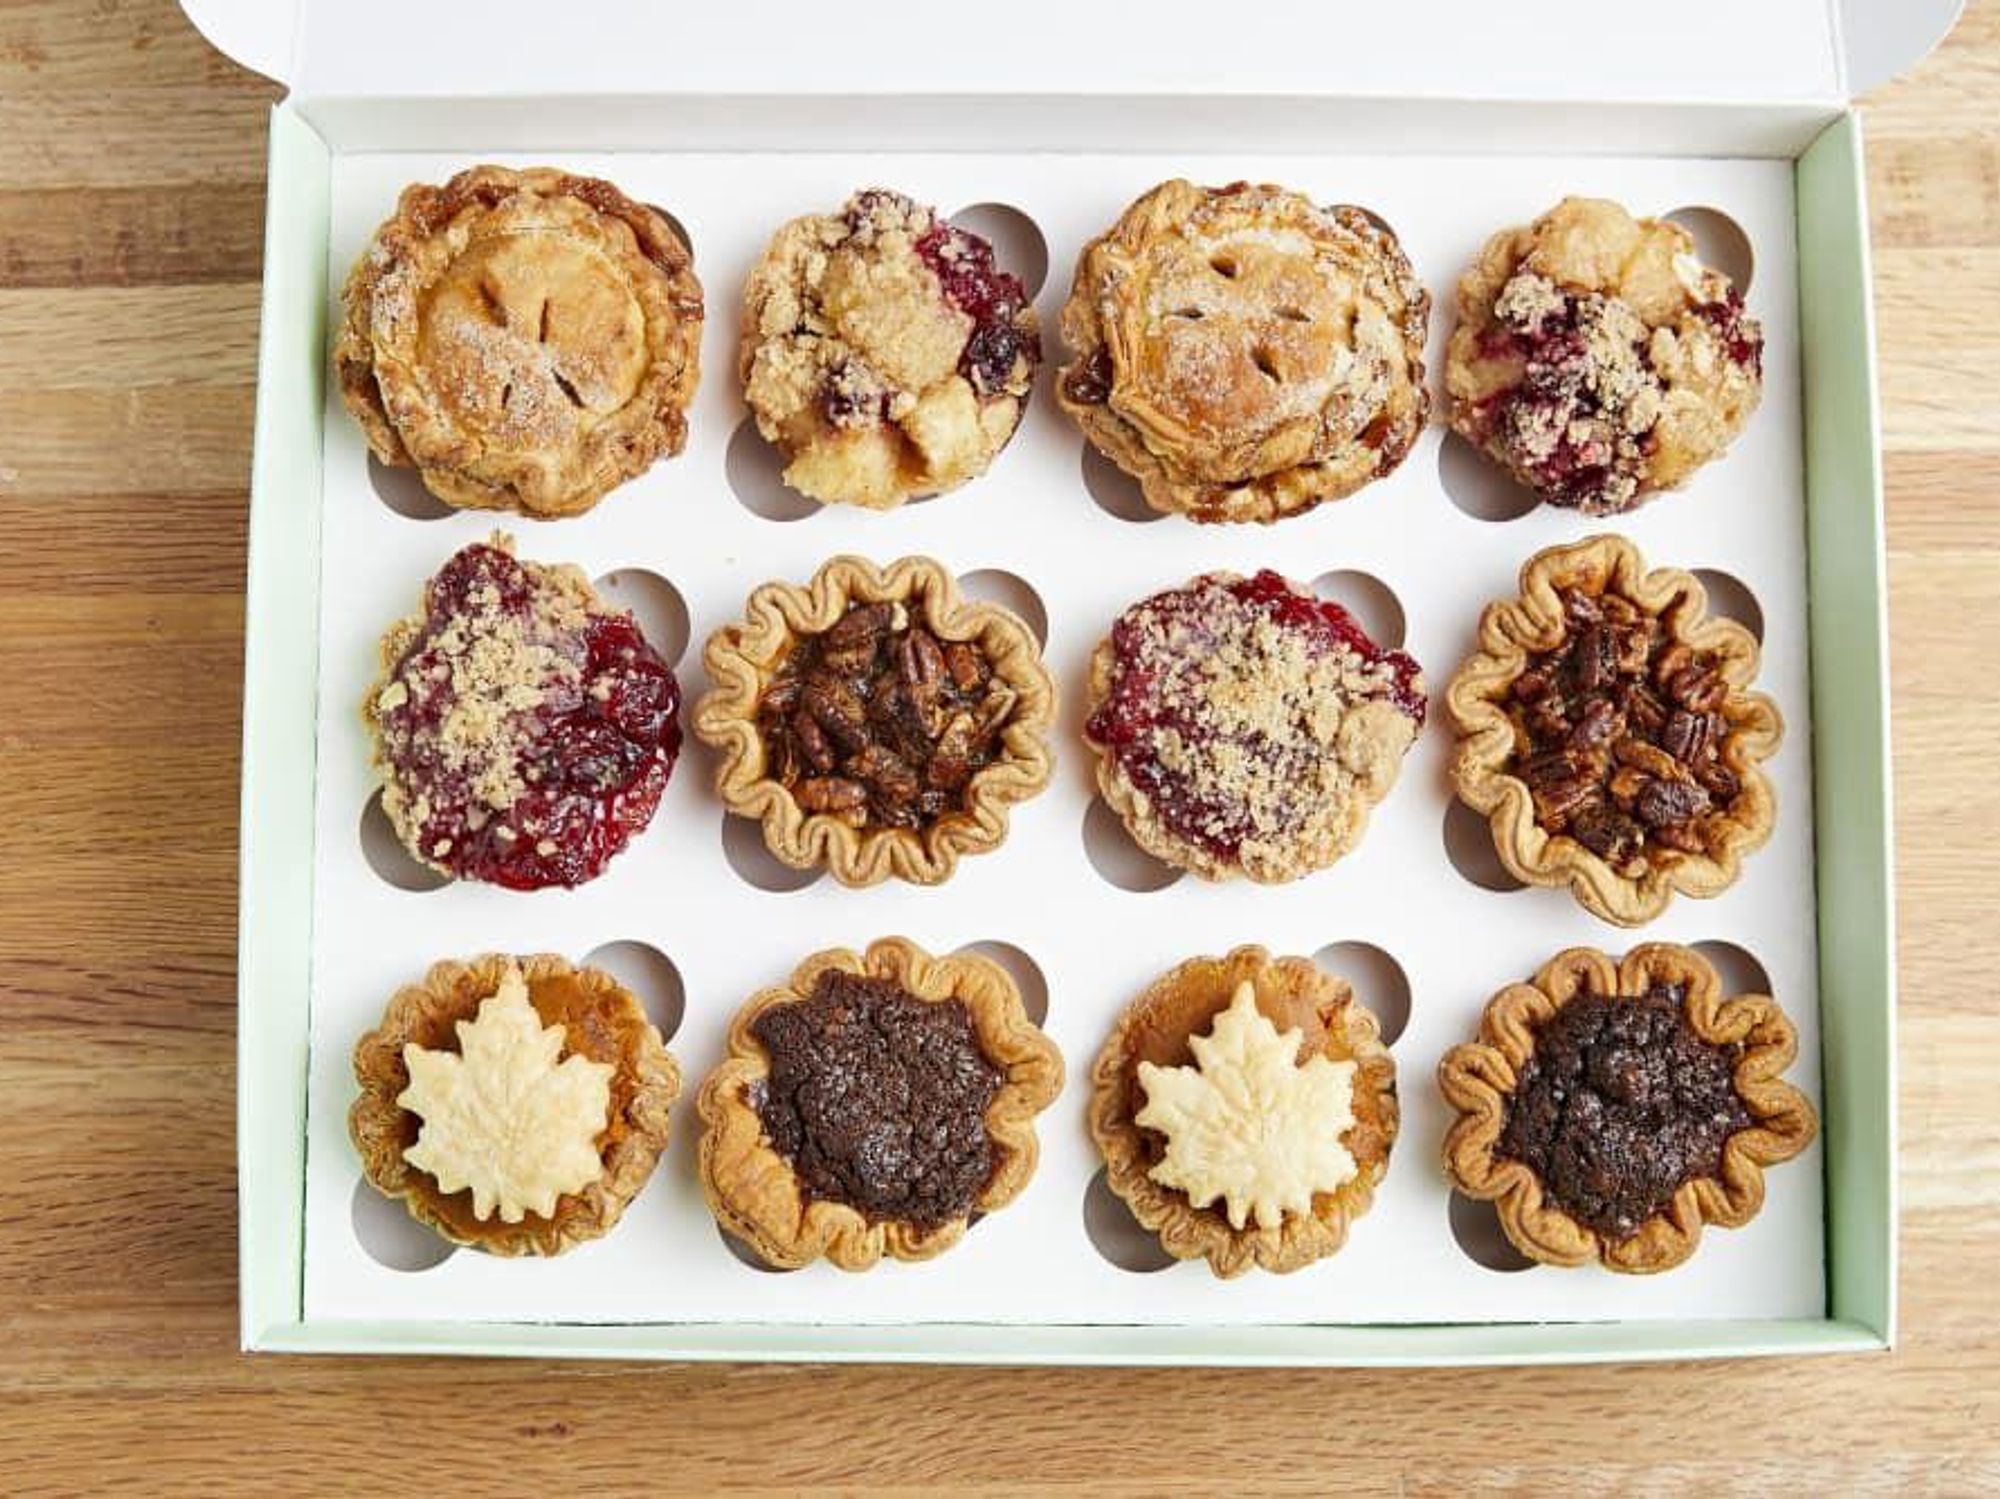 A 12 pack of pies in 6 flavors from Tiny Pies.